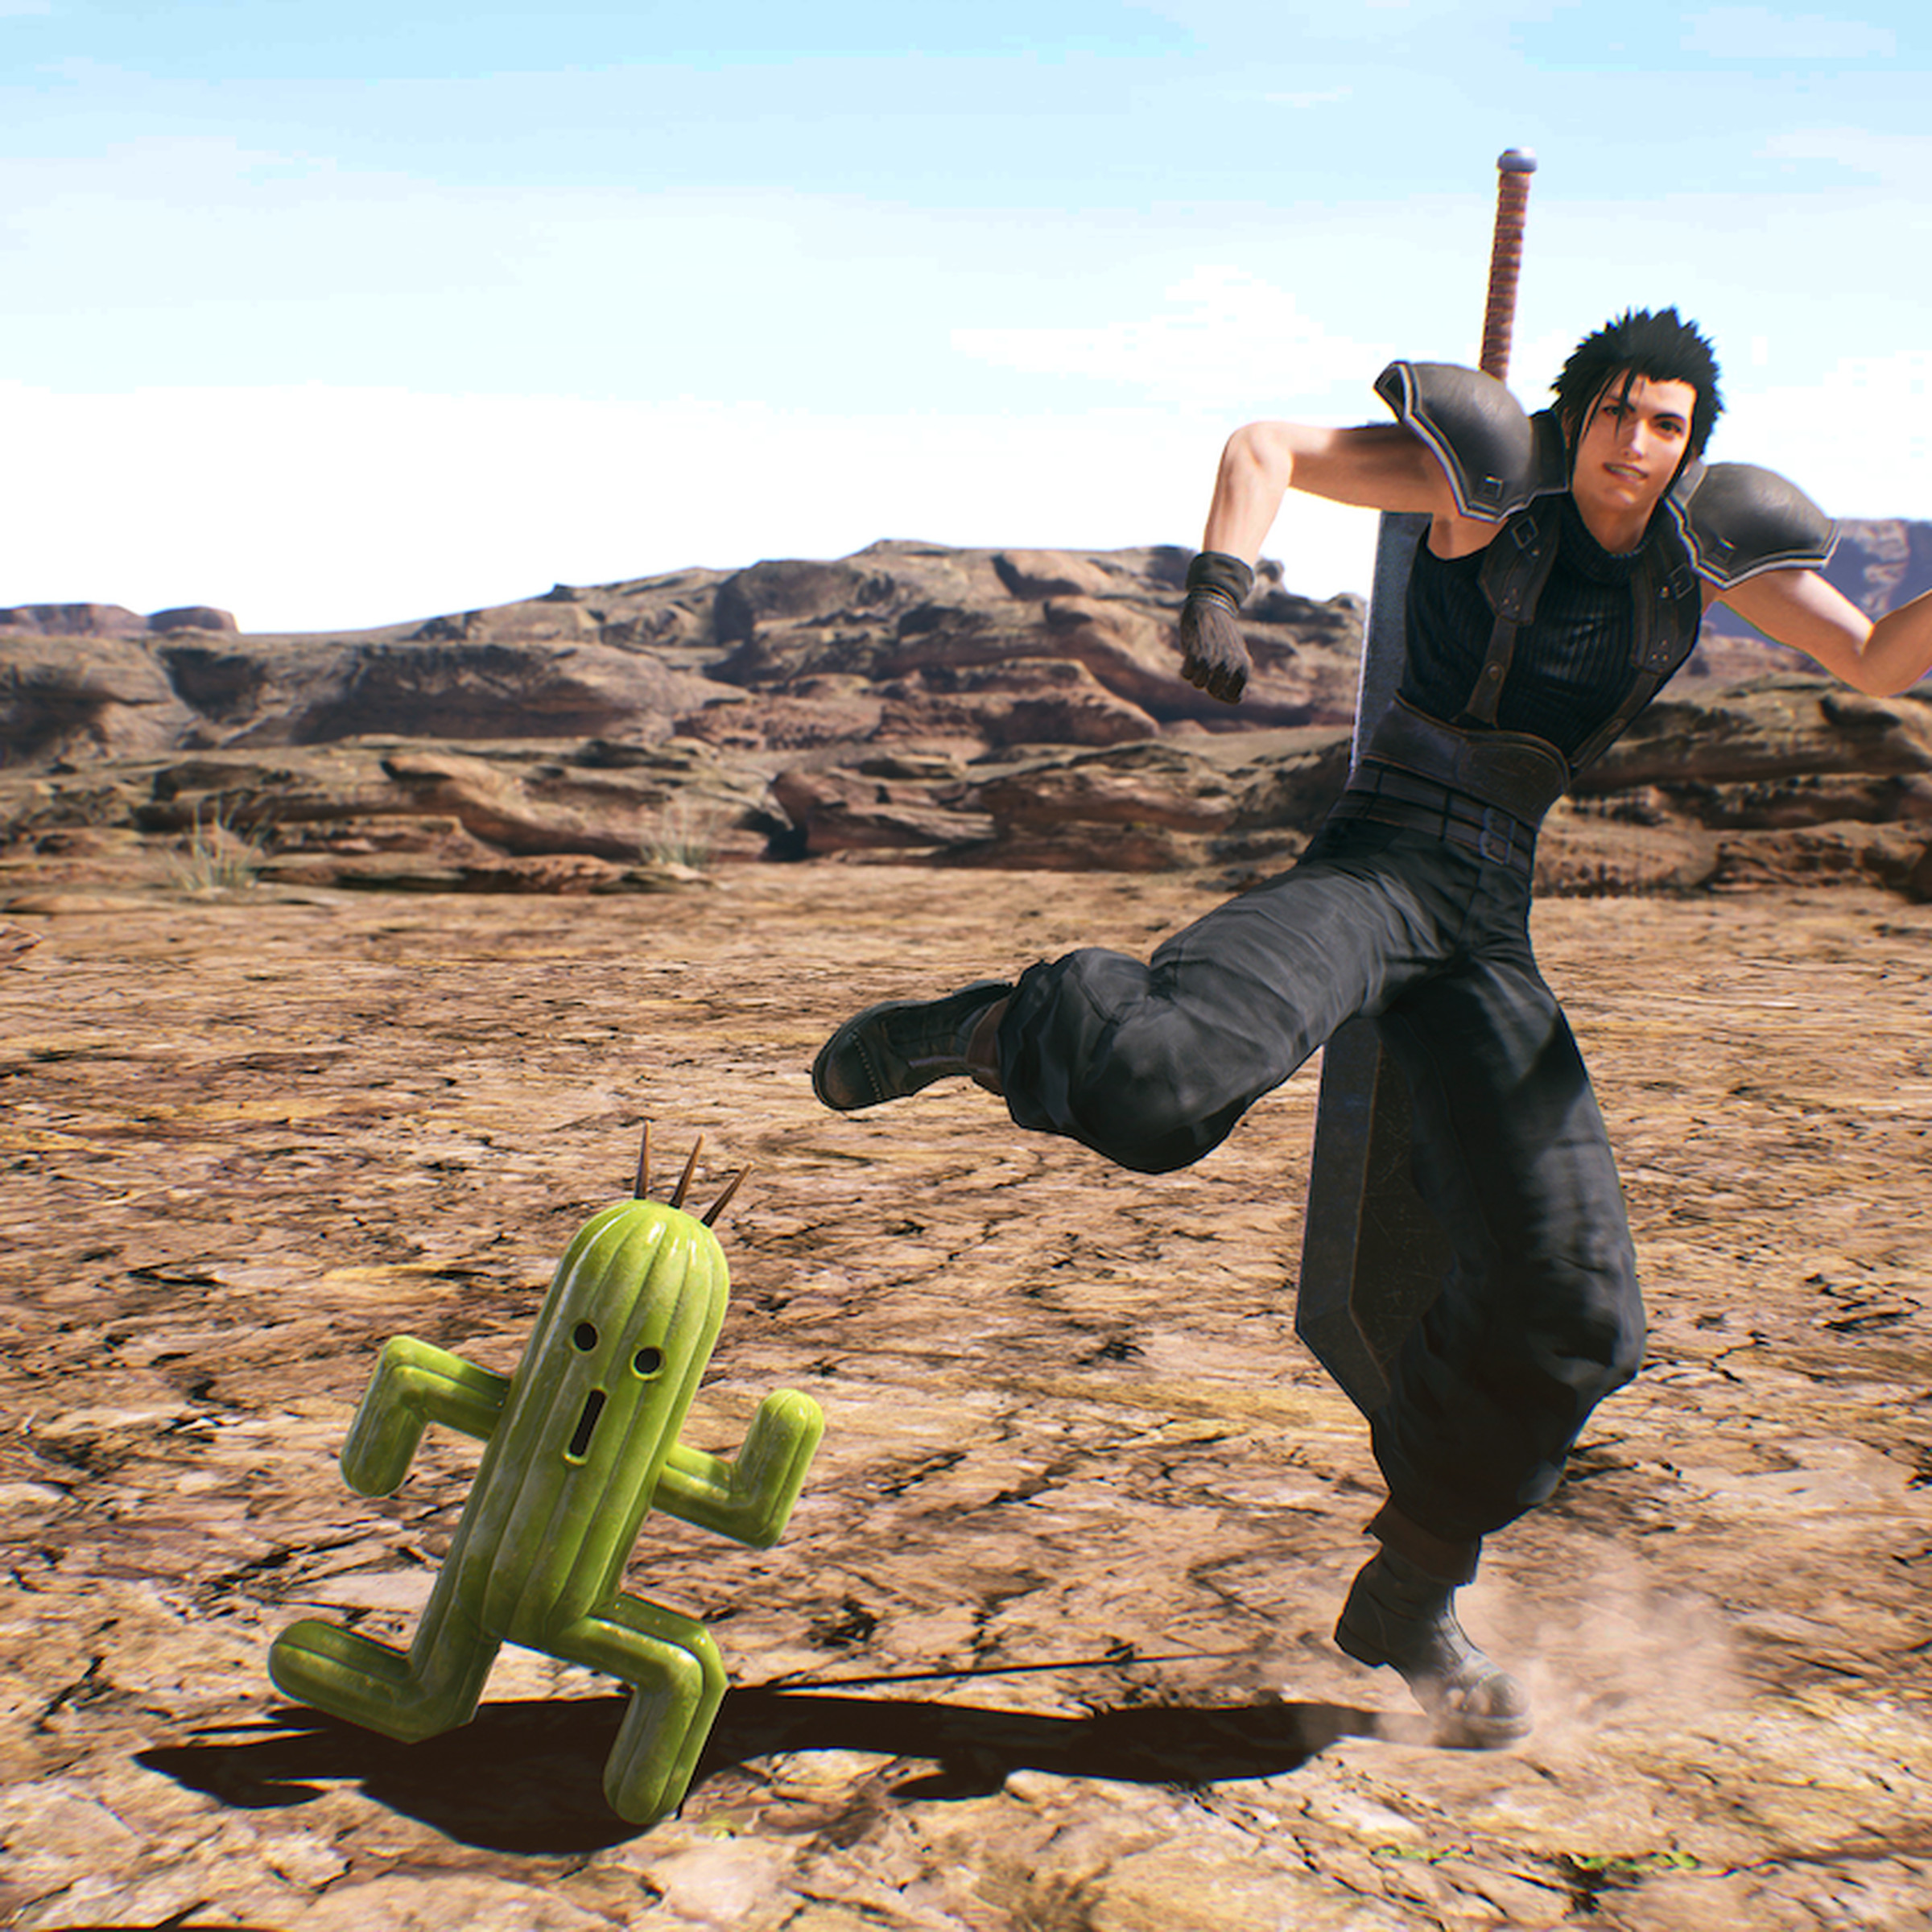 A screenshot from Crisis Core: Final Fantasy VII Reunion featuring Zack and a Cactuar.